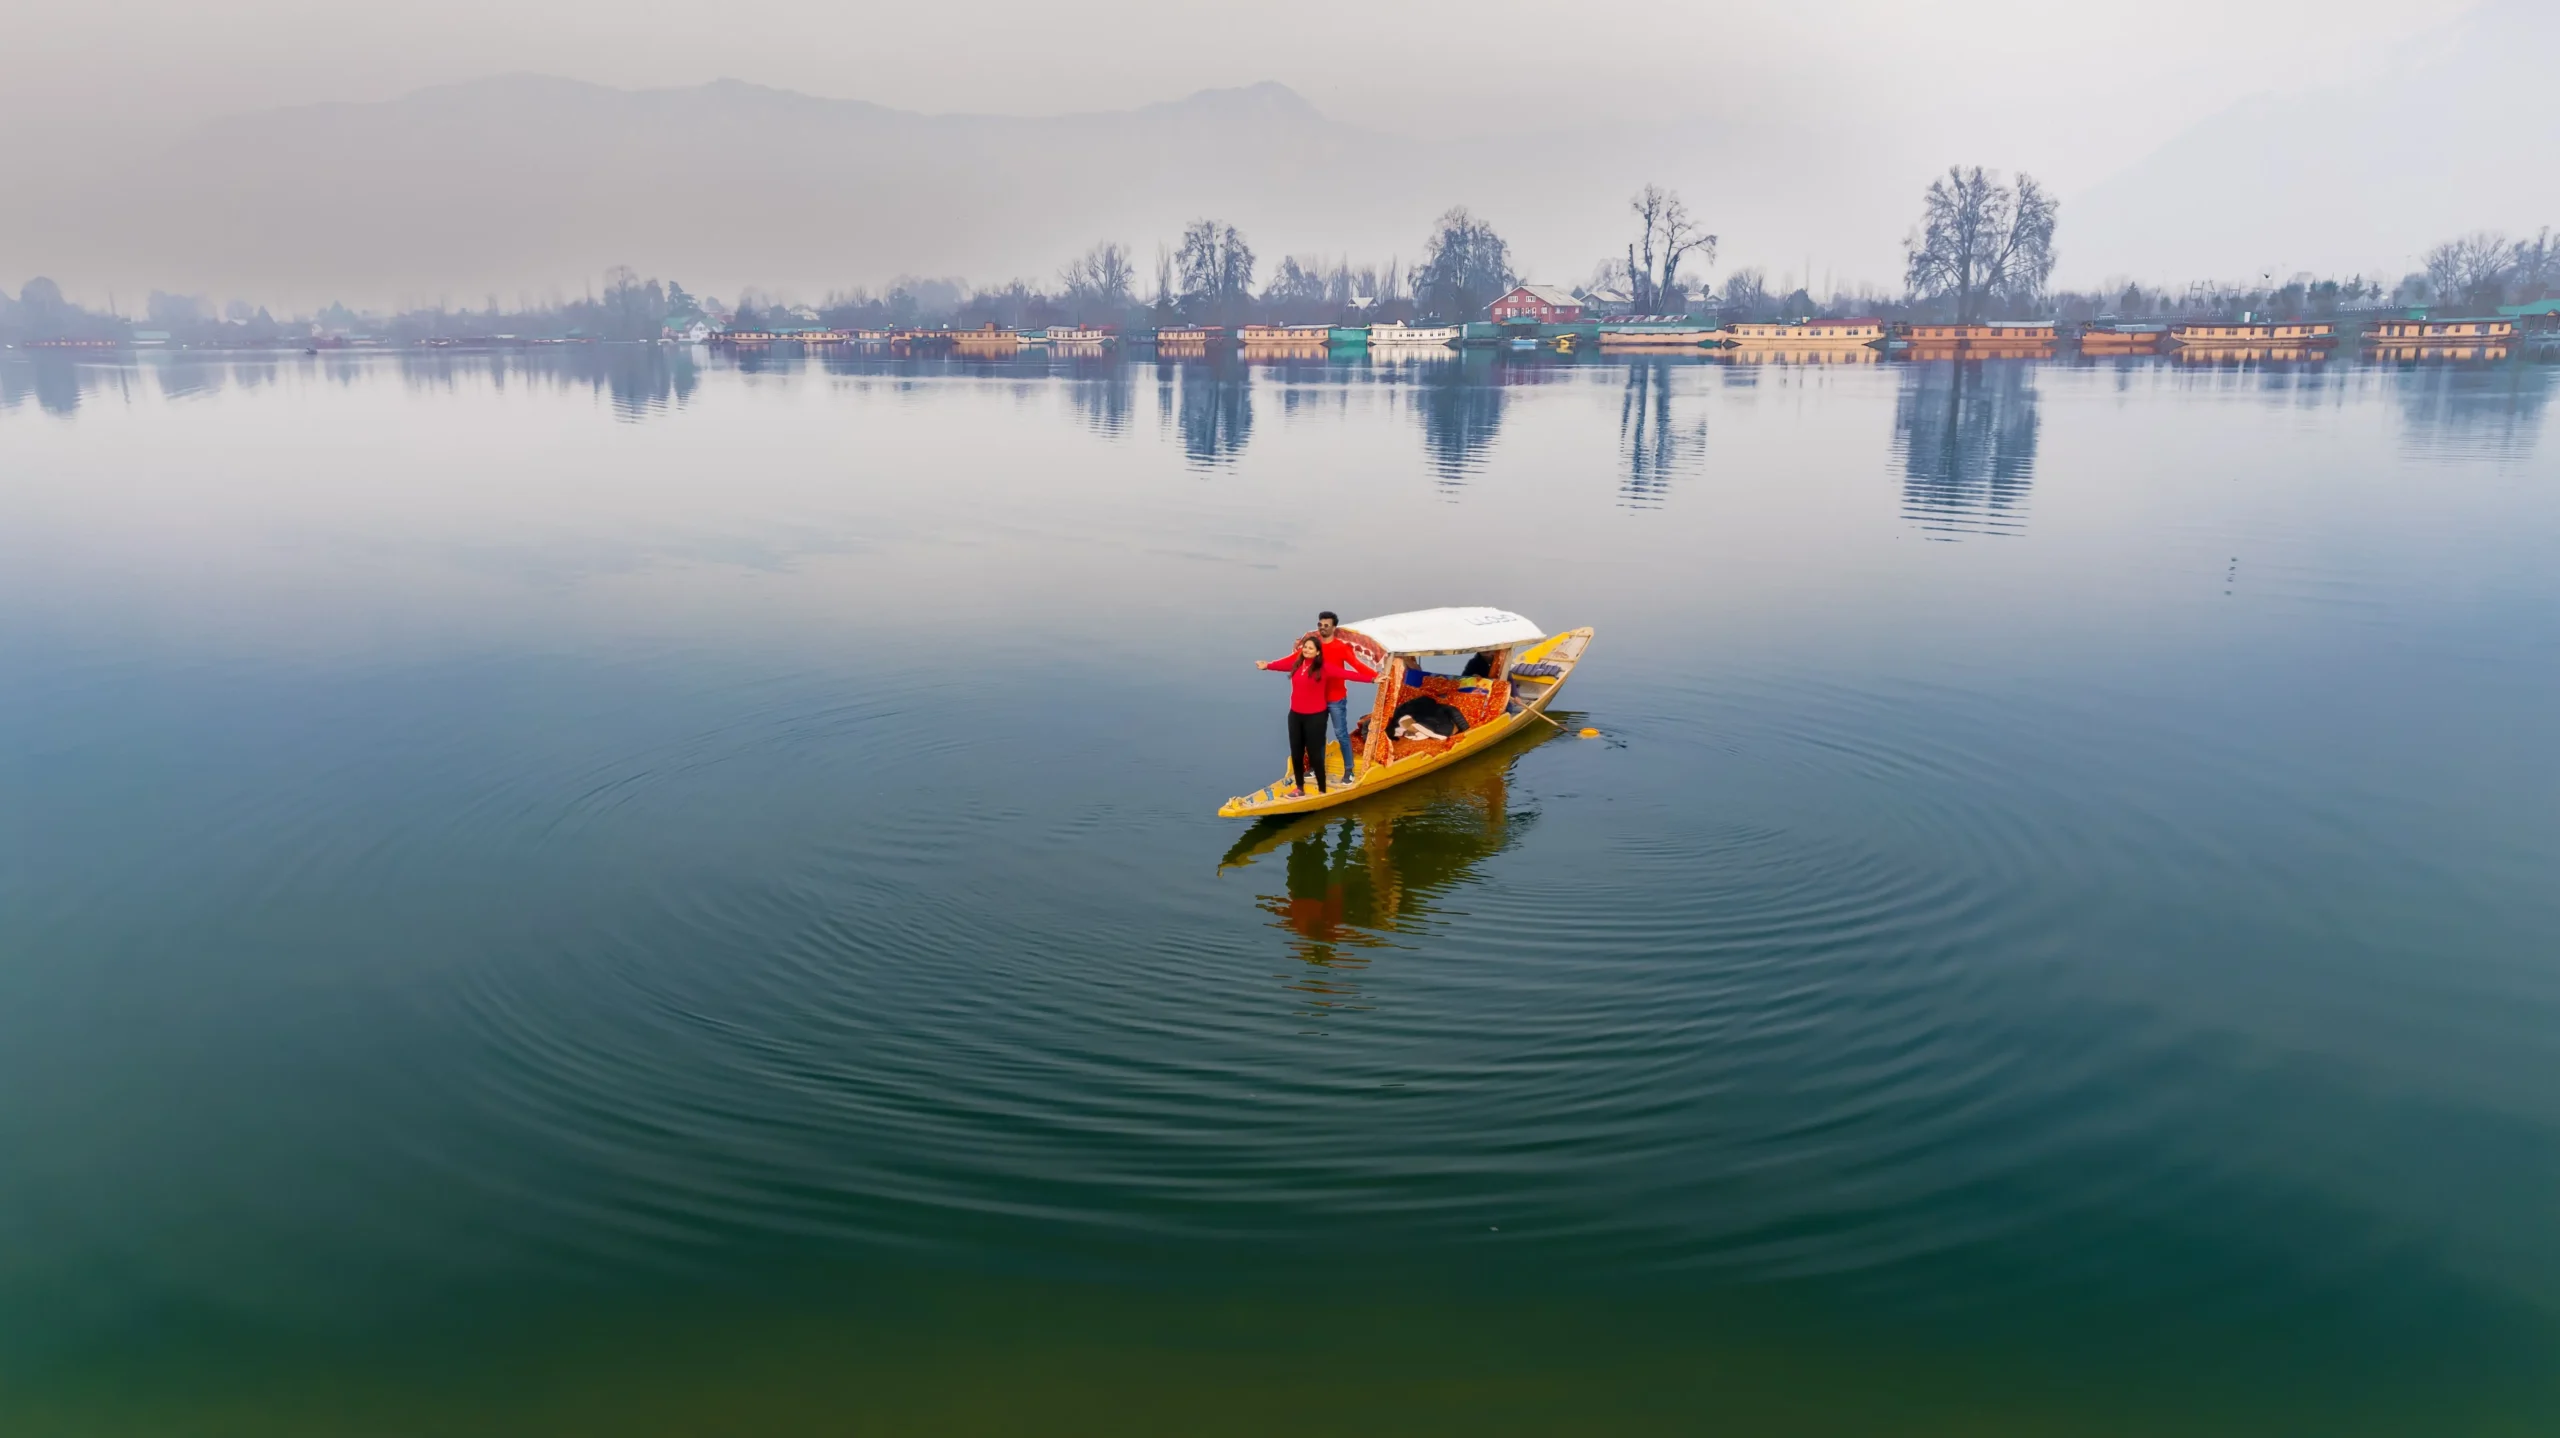 Budget for kashmir trip with pack to kashmir